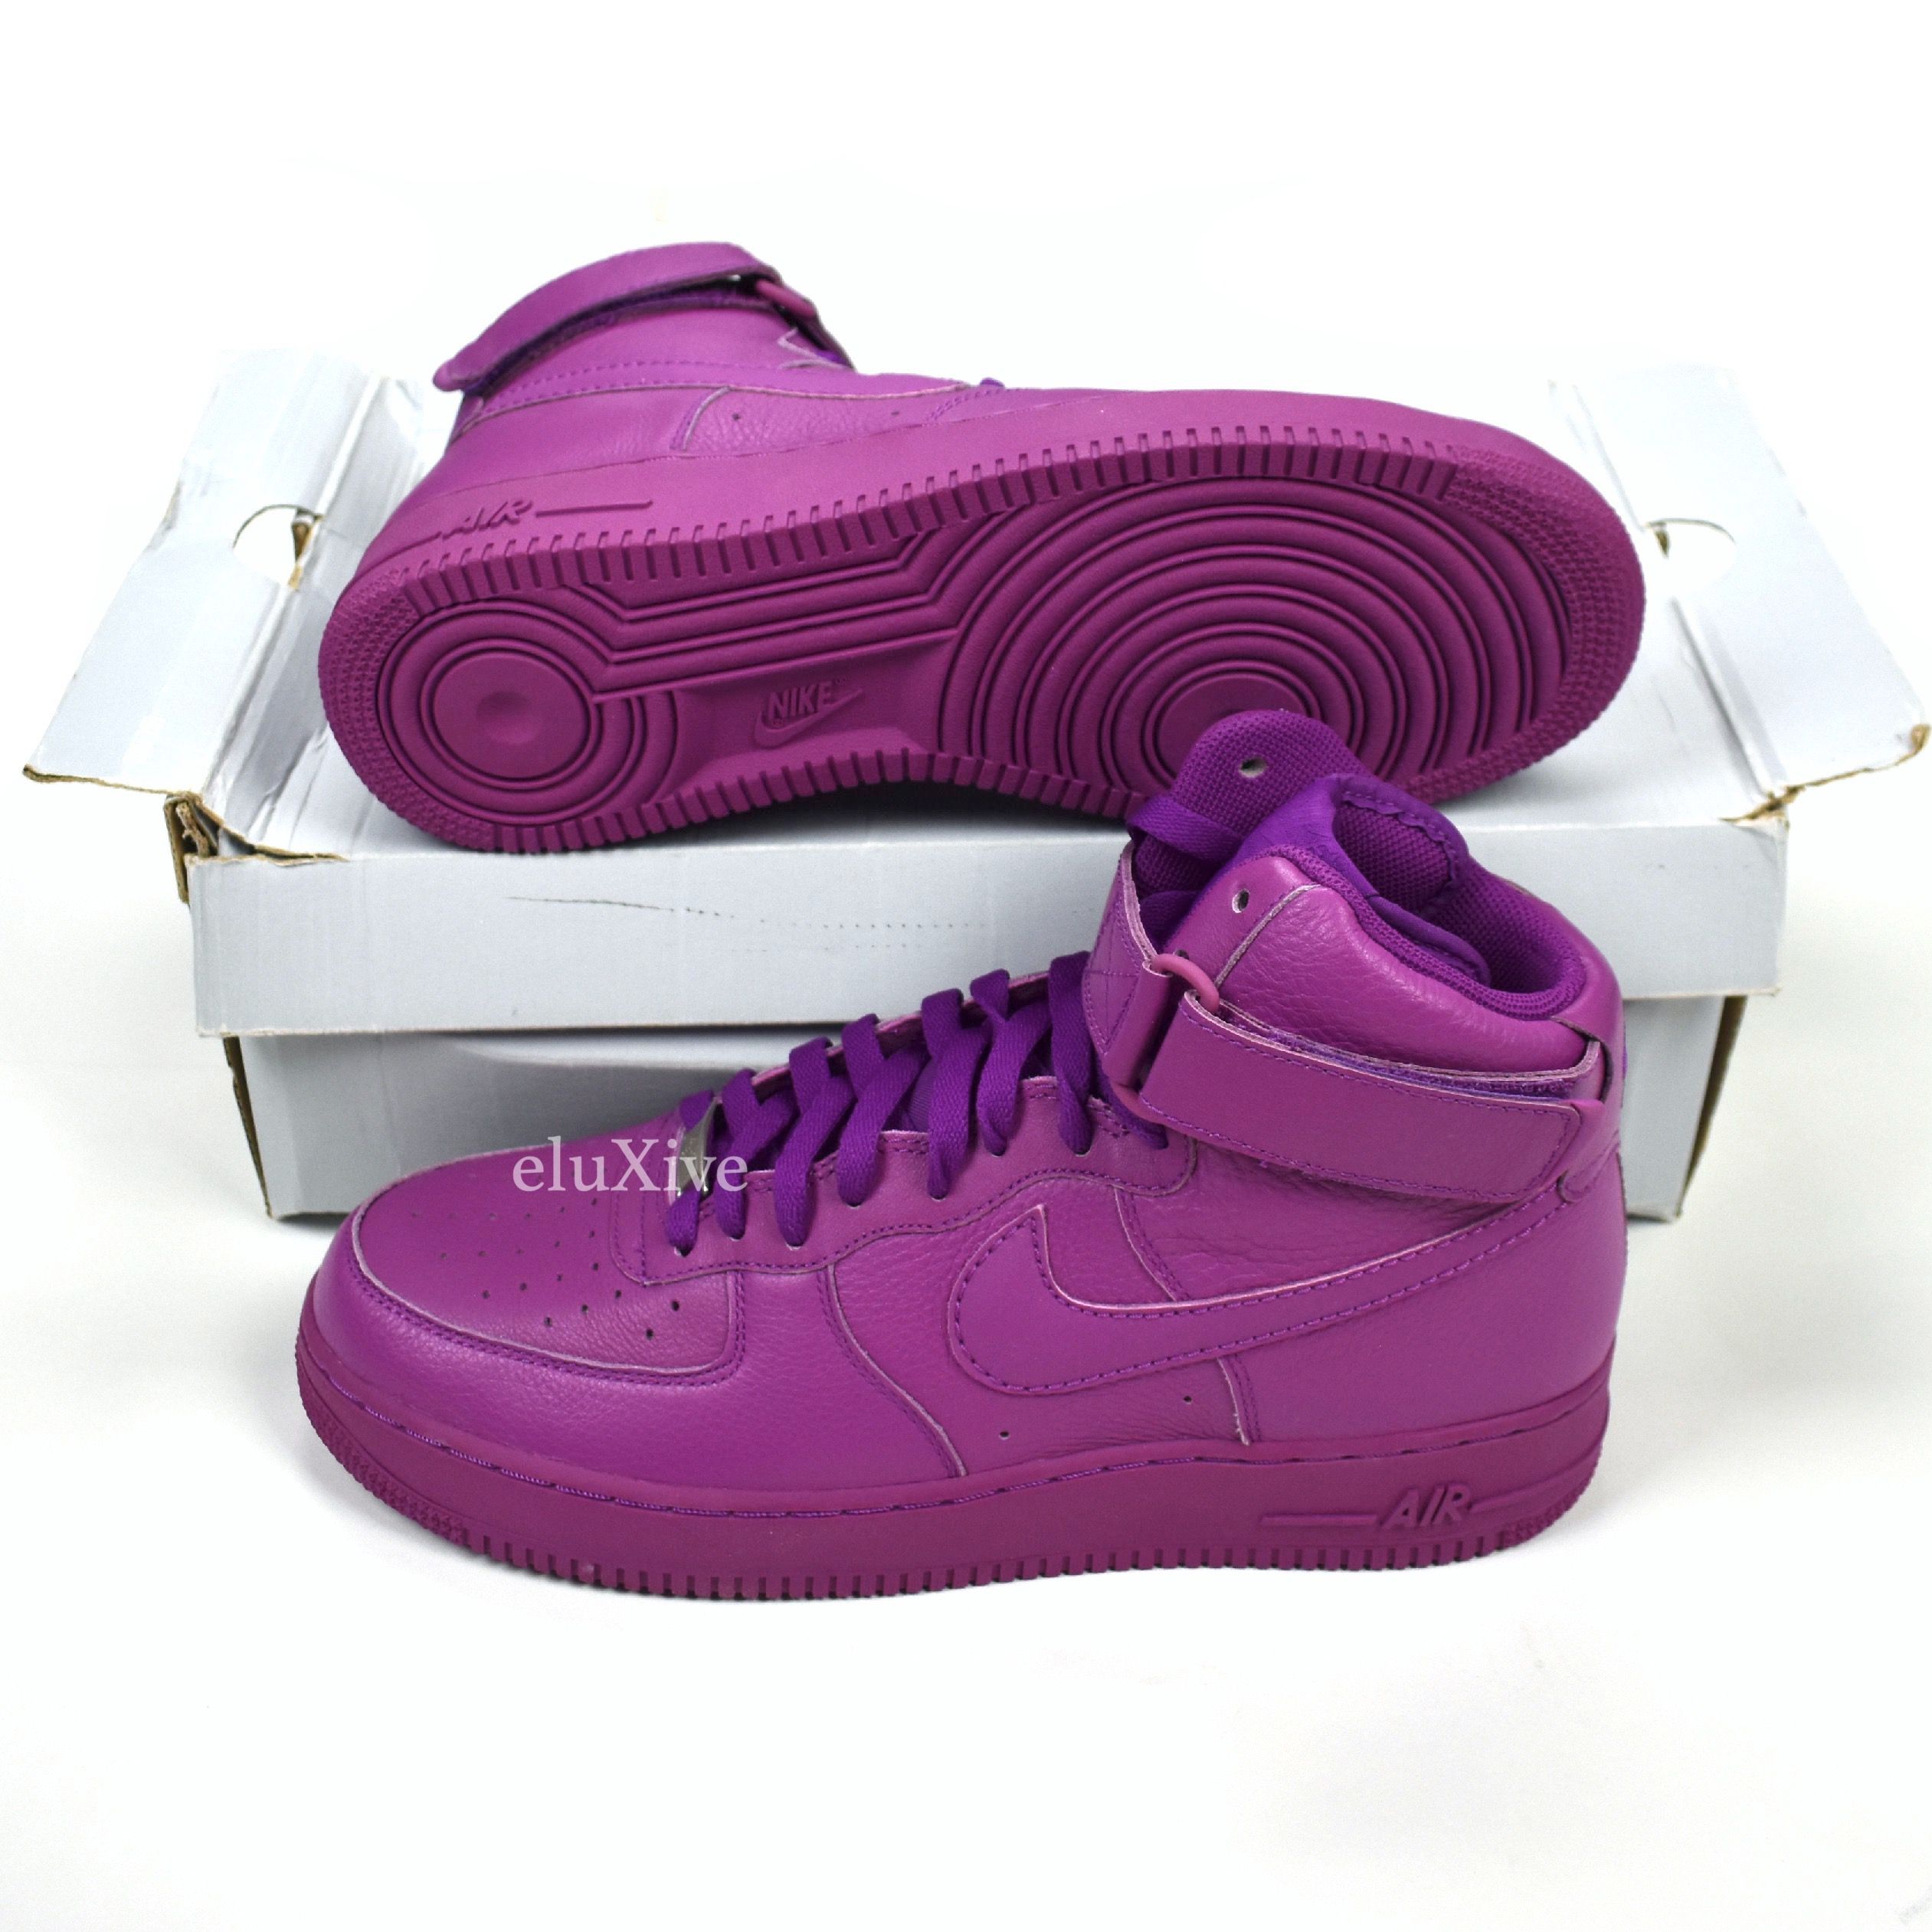 Nike Nike Air Force 1 High Color Pack 2008 Red Plum DS Size US 10.5 / EU 43-44 - 2 Preview